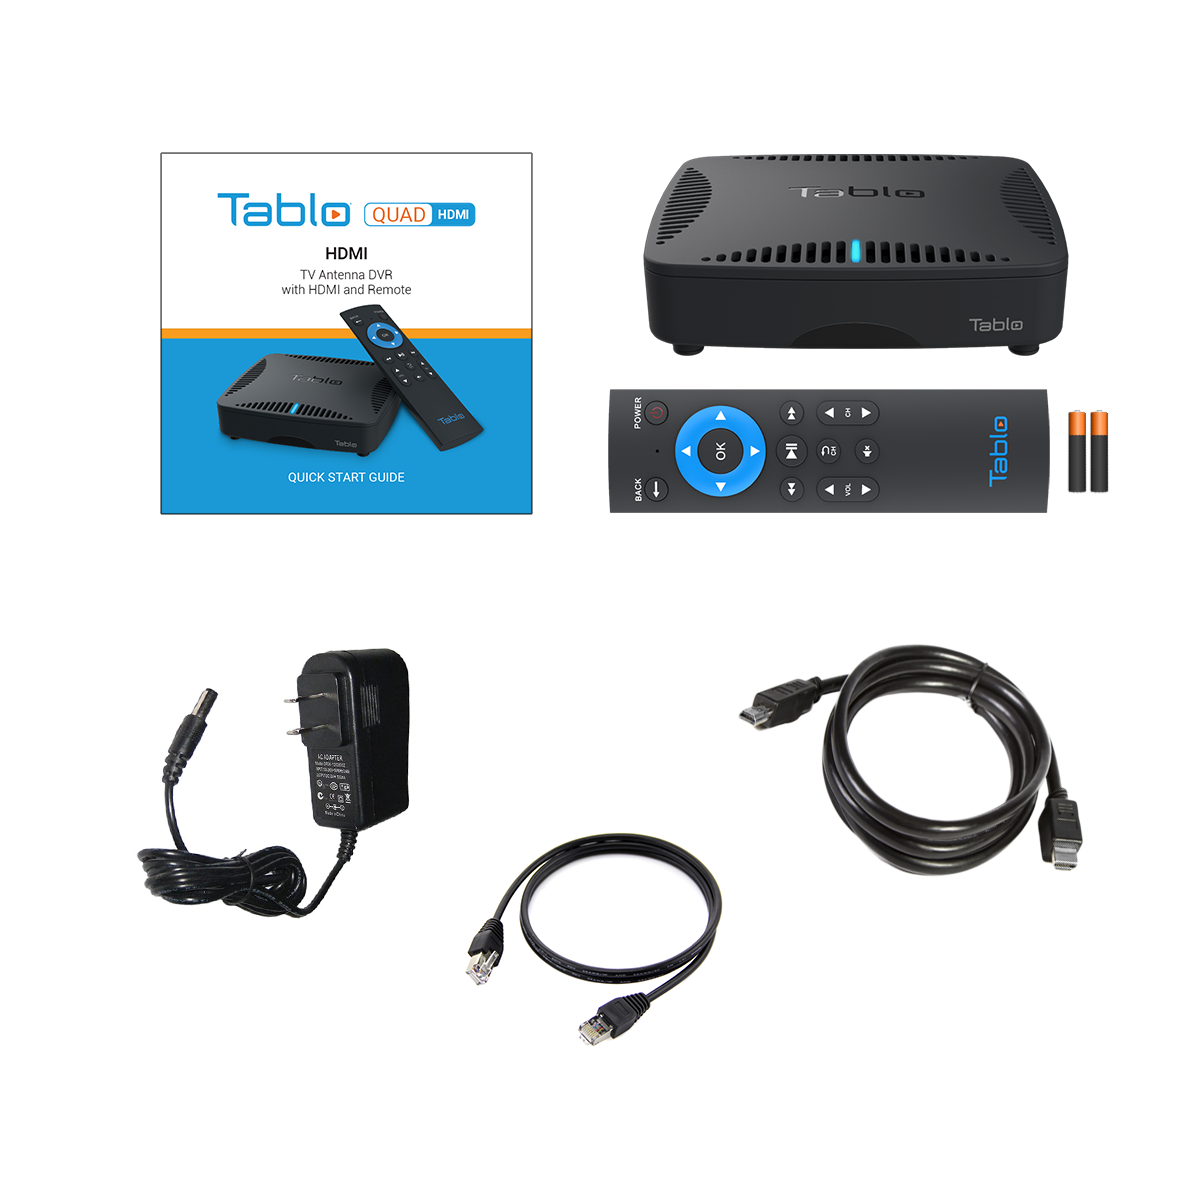 Tablo QUAD HDMI Over-The-Air (OTA) DVR (Digital Video Recorder) for Cord Cutters. What's in the box: Quick Start Guide, Tablo DVR, remote, batteries, power adapter, ethernet cable, HDMI cable.